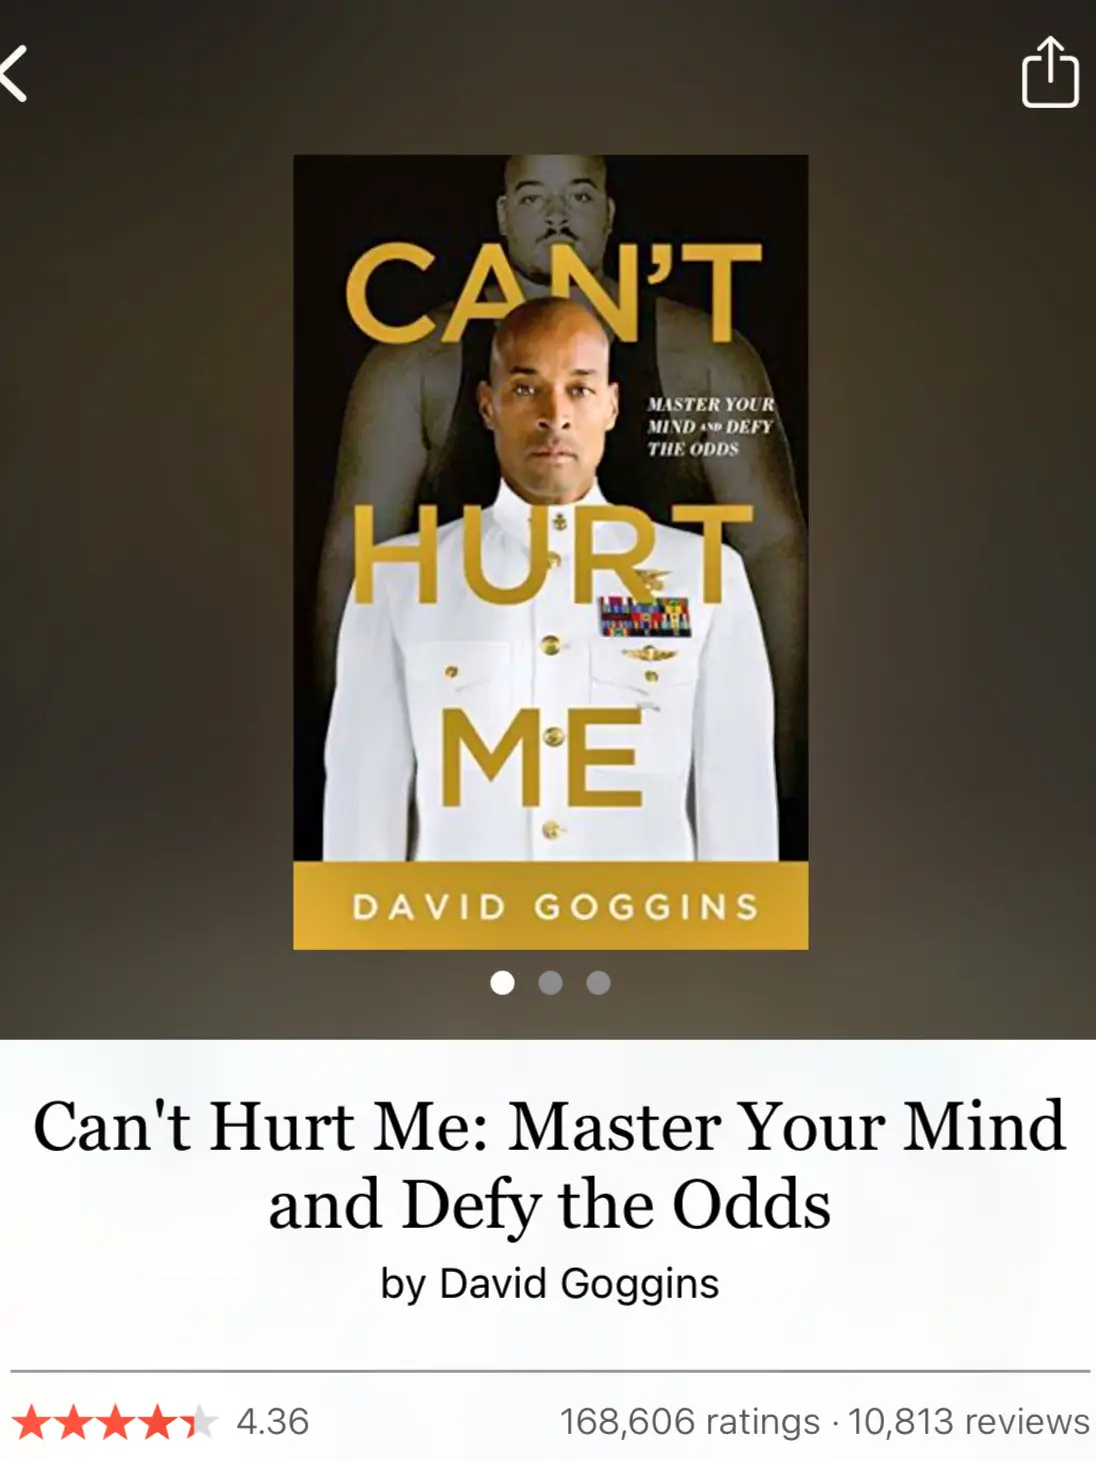 Short Book Review: Can't Hurt Me by David Goggins – Jon Penland